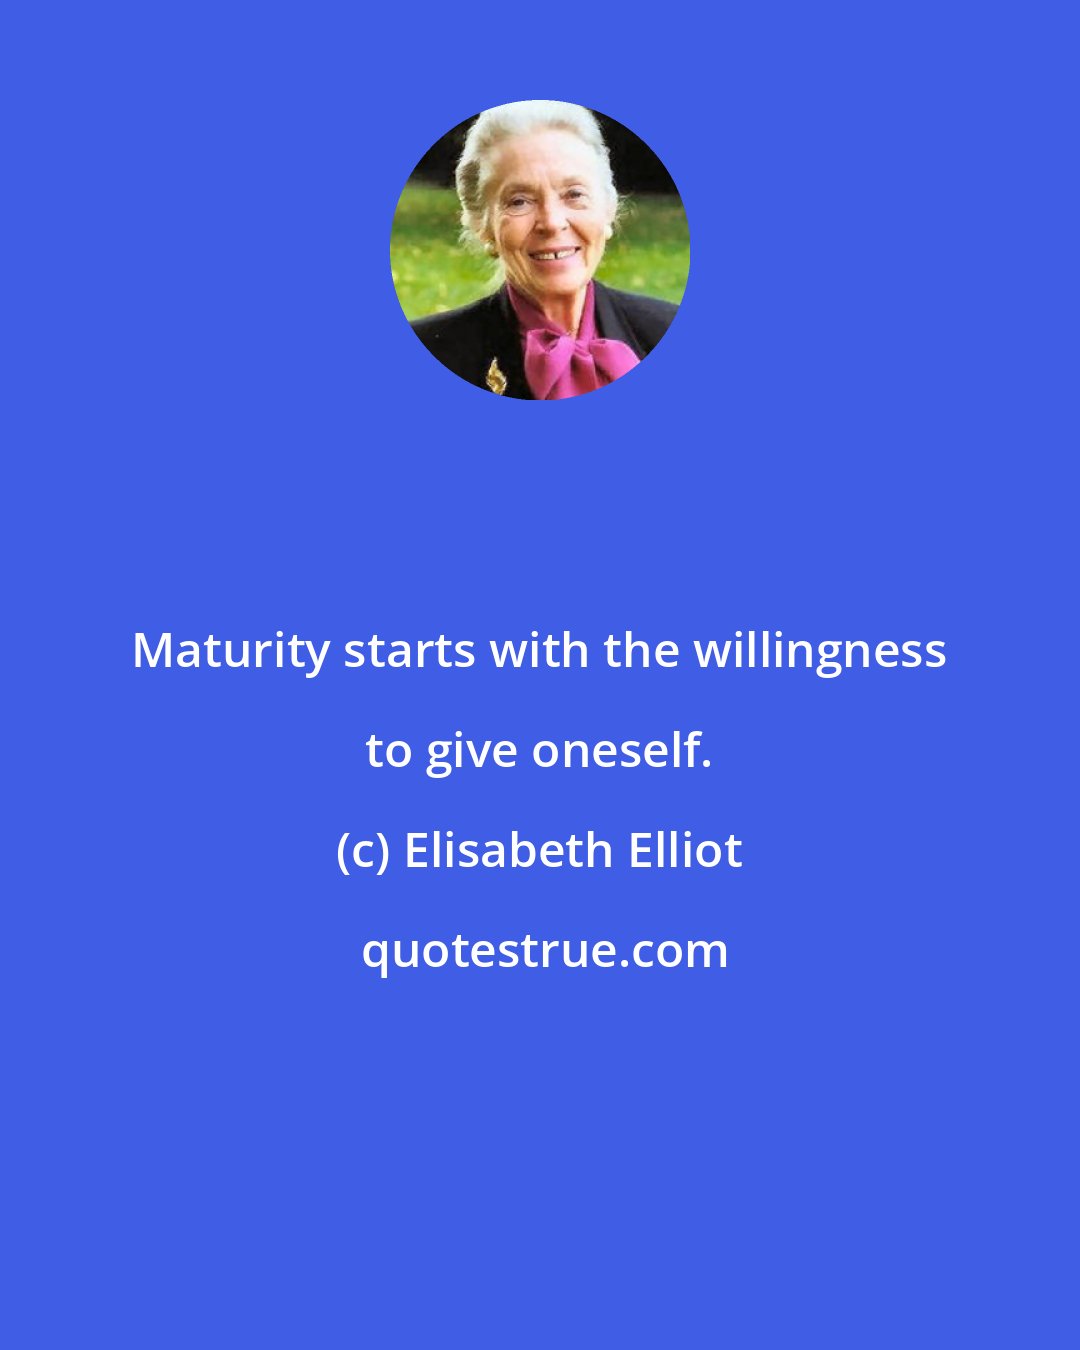 Elisabeth Elliot: Maturity starts with the willingness to give oneself.